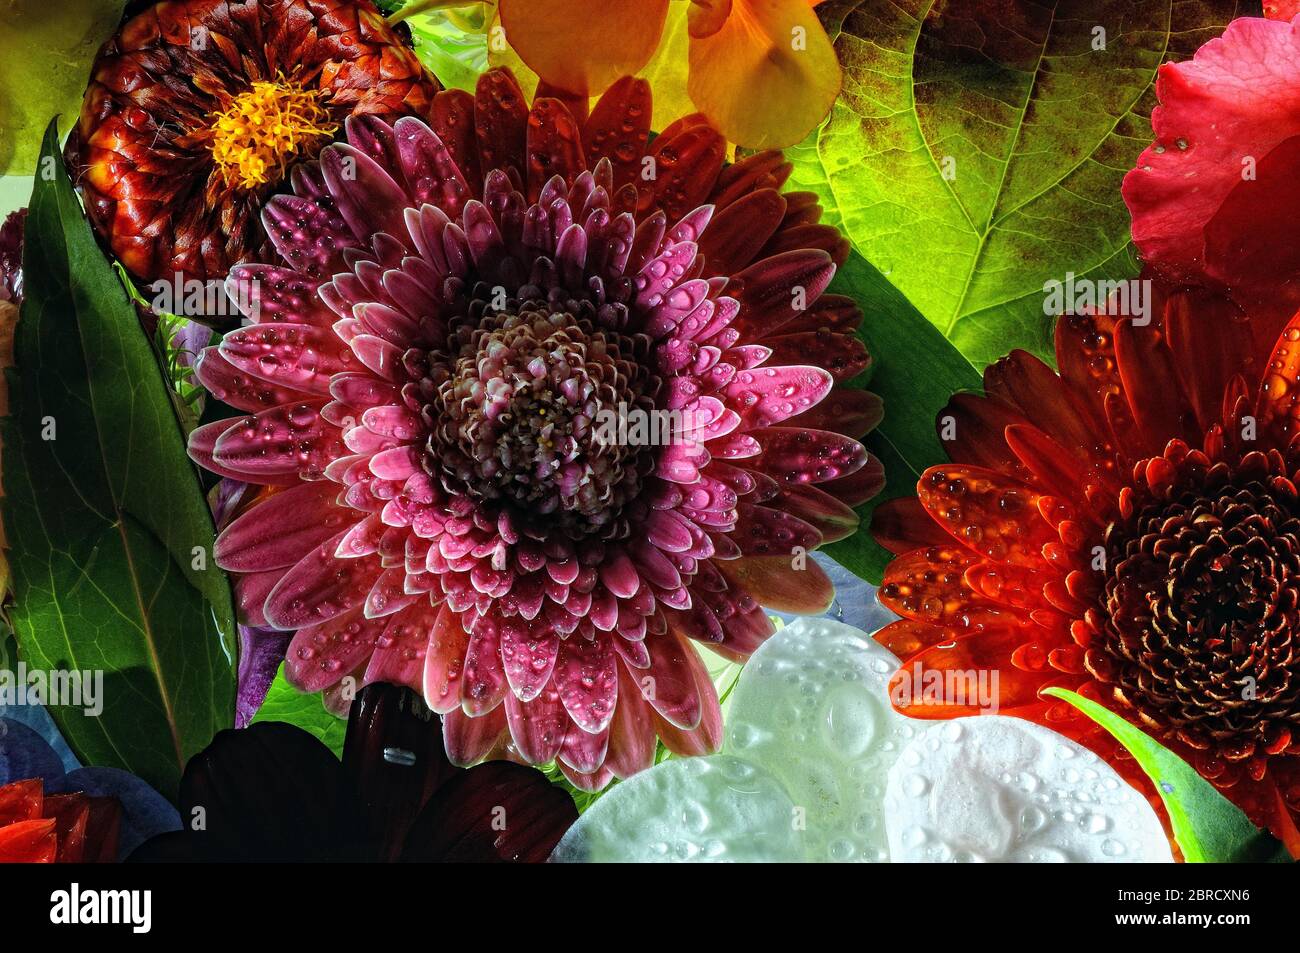 Various flowers of flowers, Germany Stock Photo